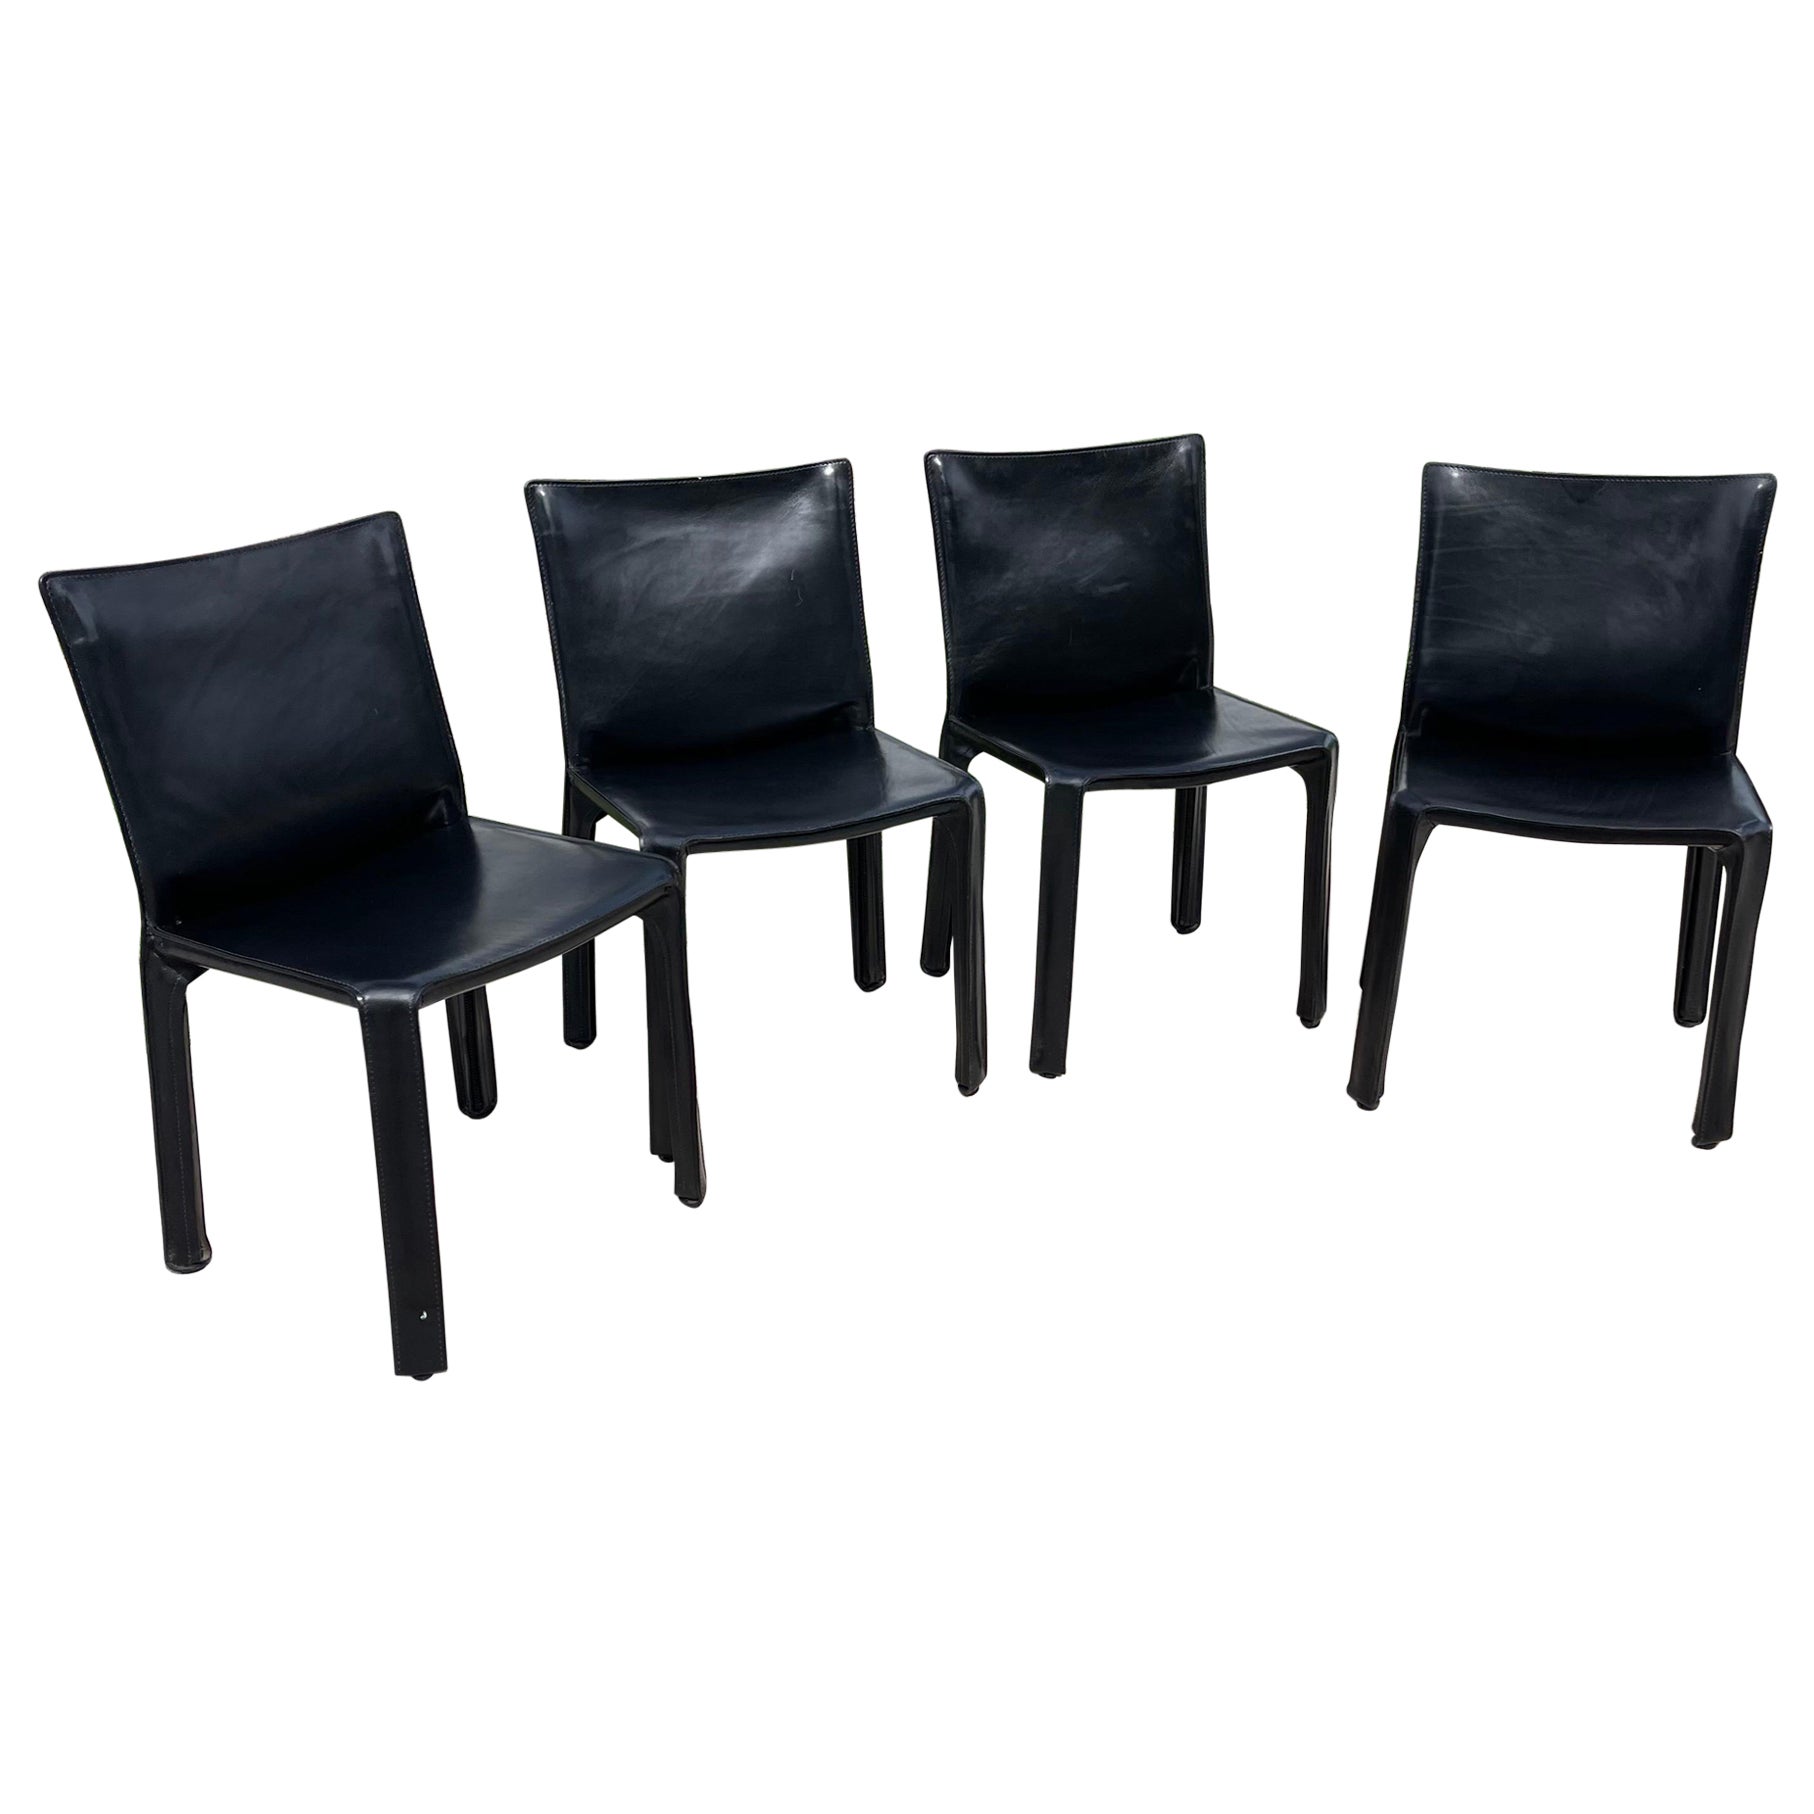 Mario Bellini for Cassina Cab 412 Leather Clad Dining Chairs, Set of 4